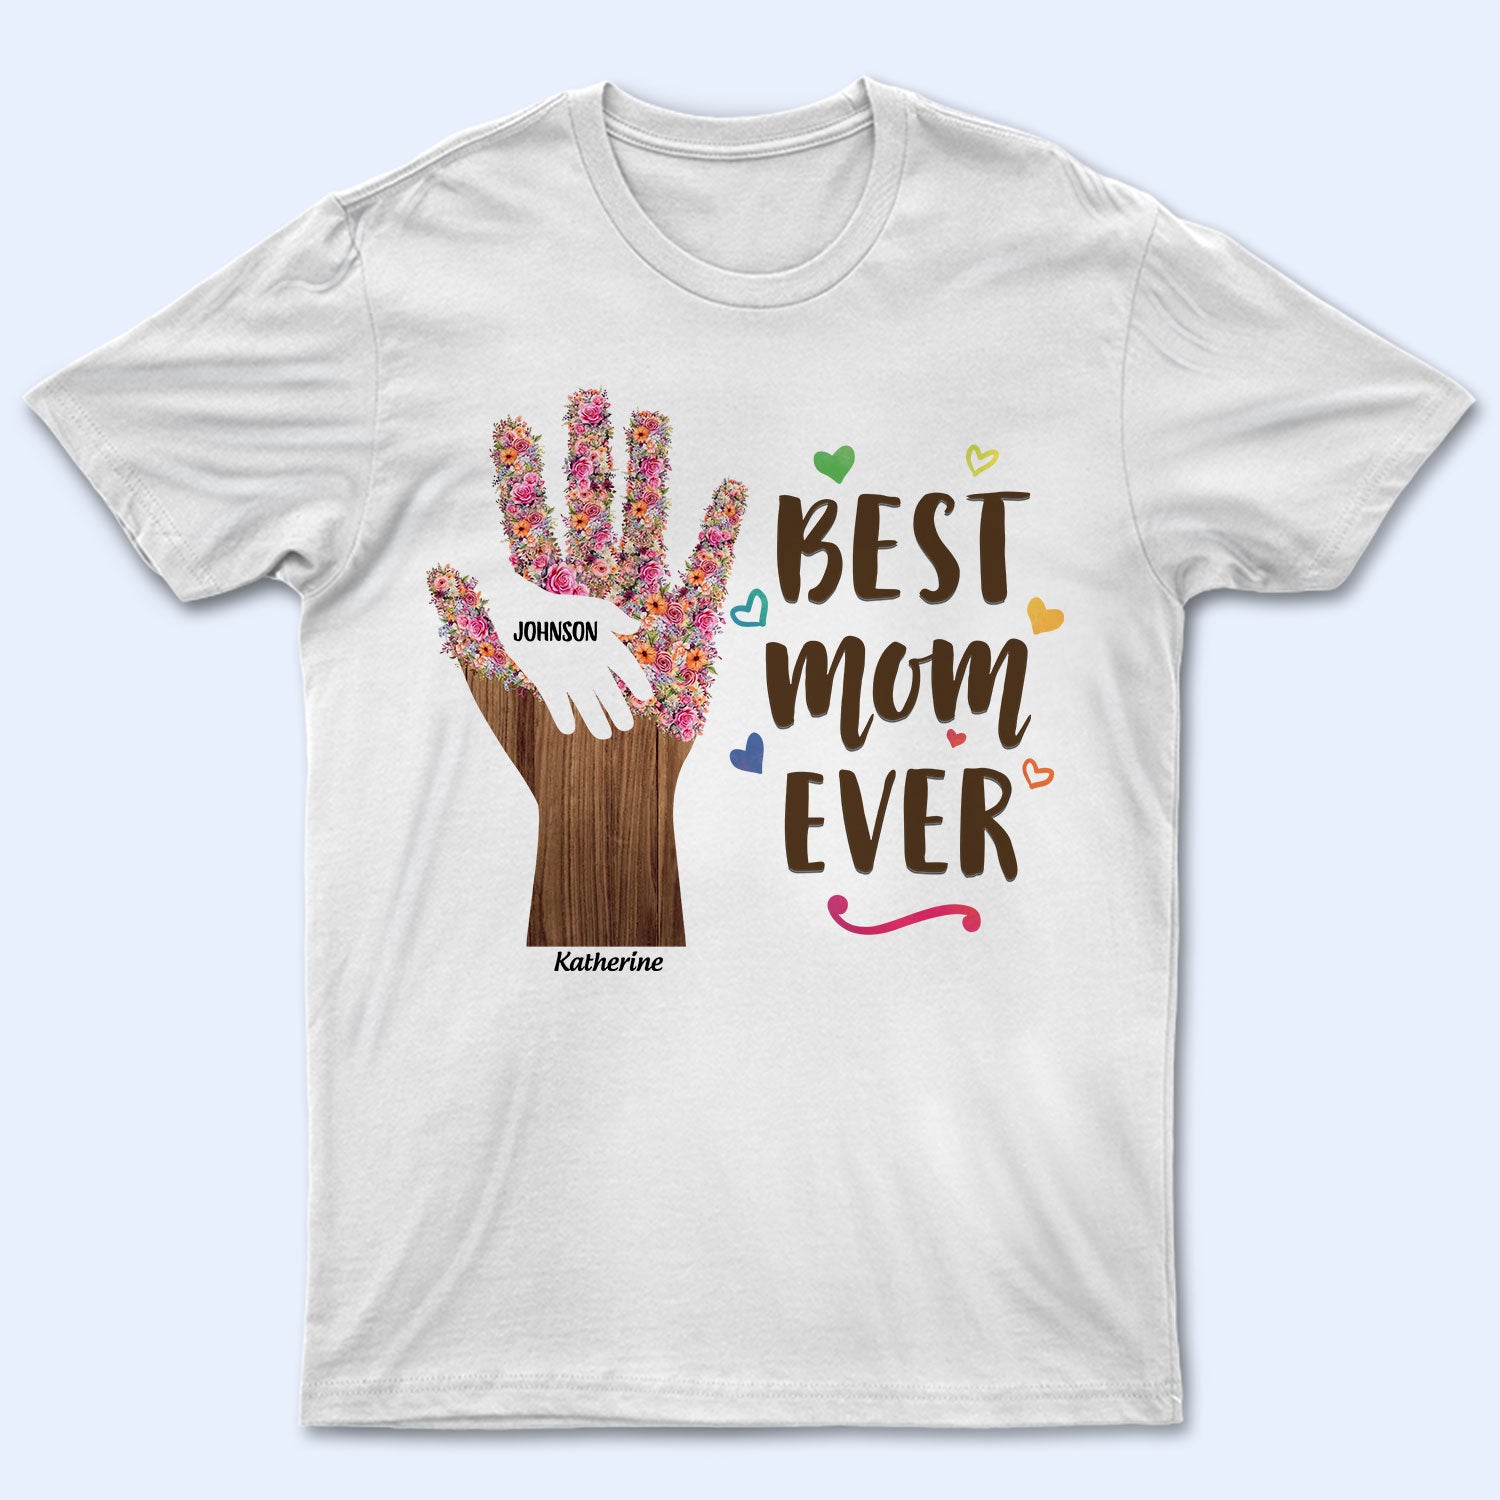 Best Mom Ever - Gift For Mom, Mother - Personalized T Shirt